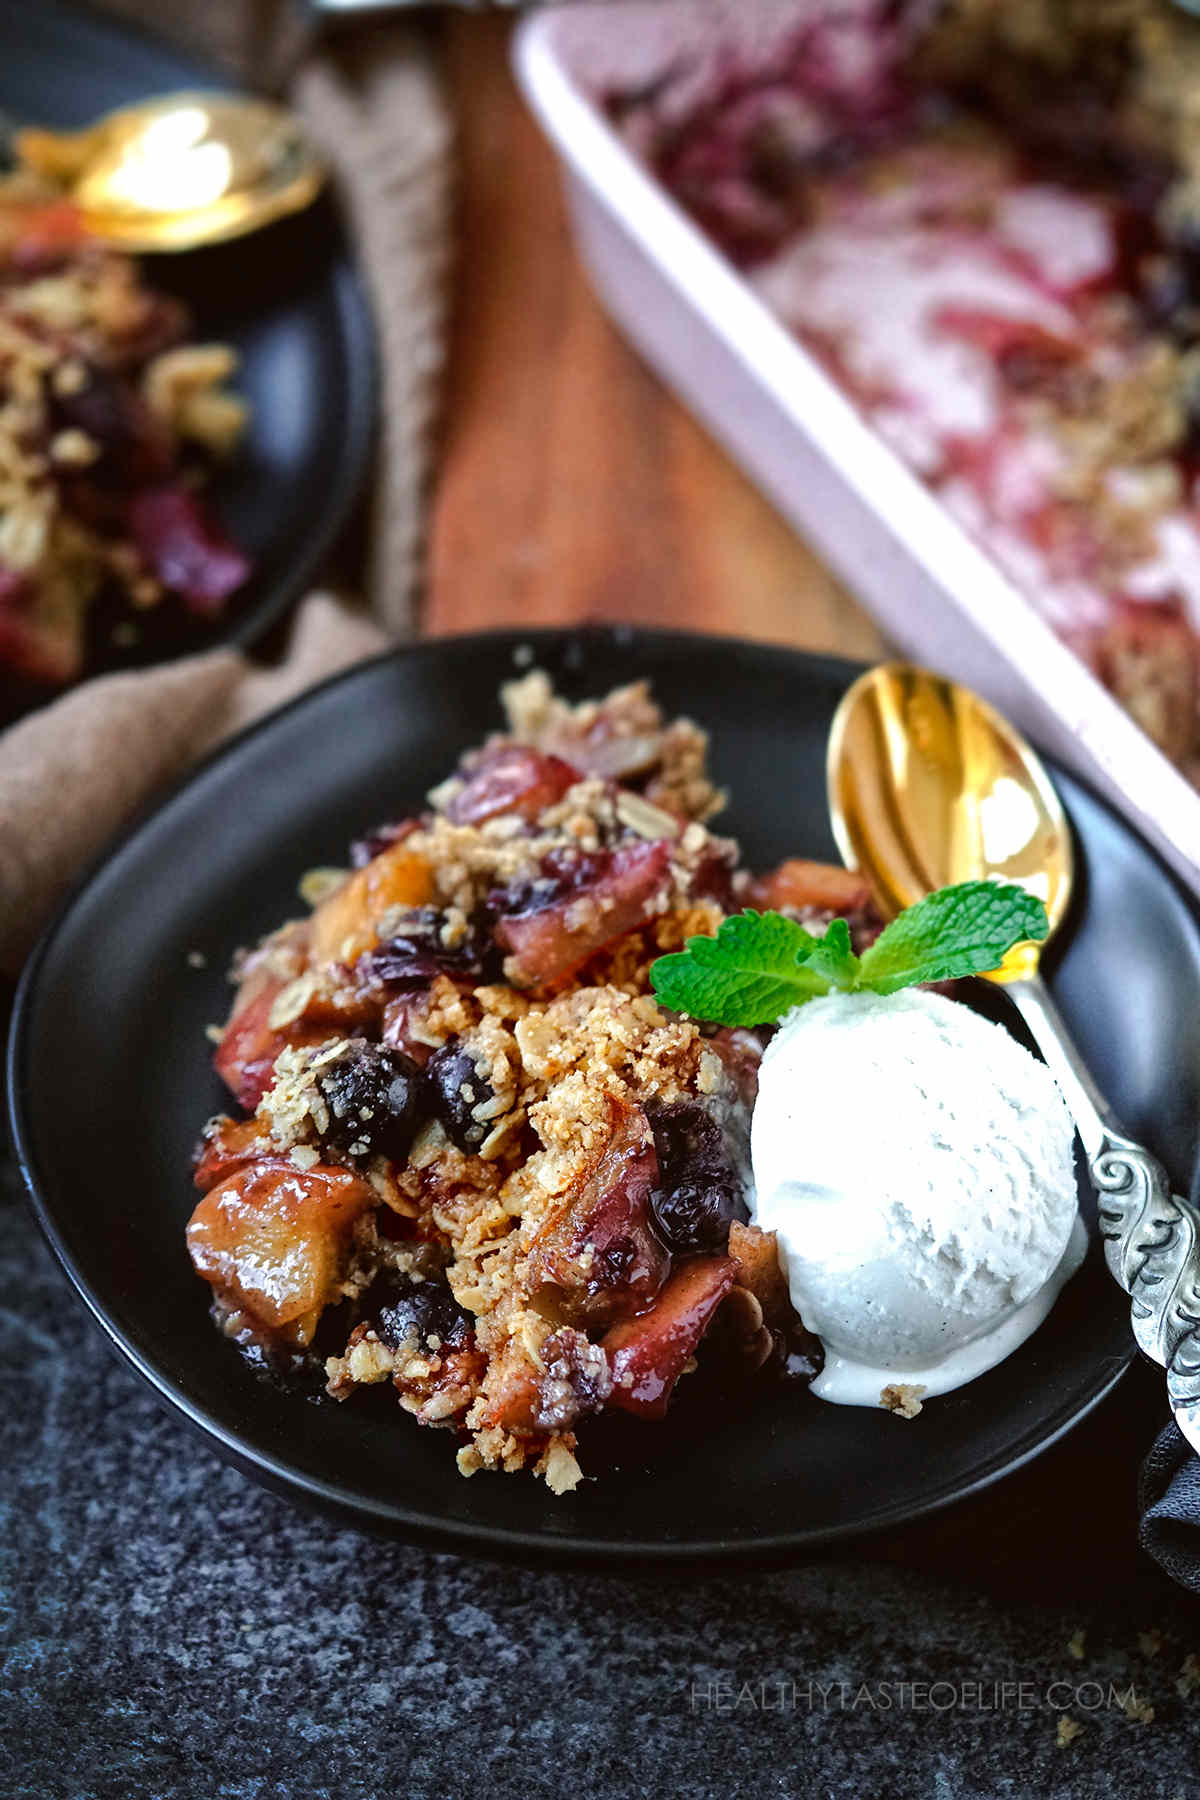 Healthy apple and berry crumble with dairy free coconut ice cream.